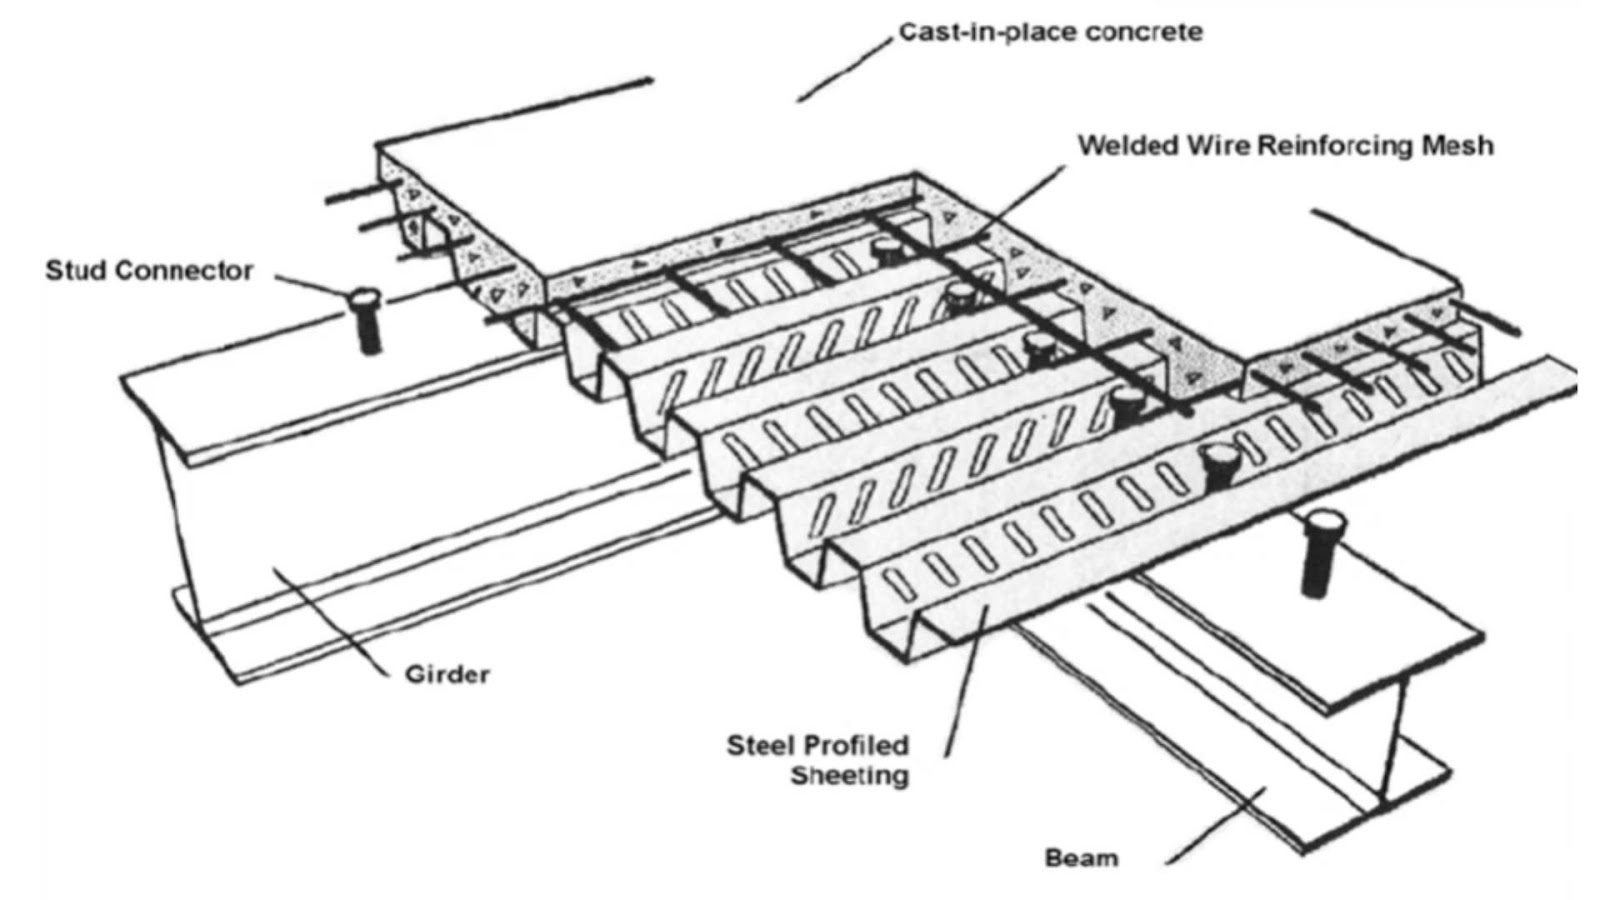 What are the composite slab reinforcement details?